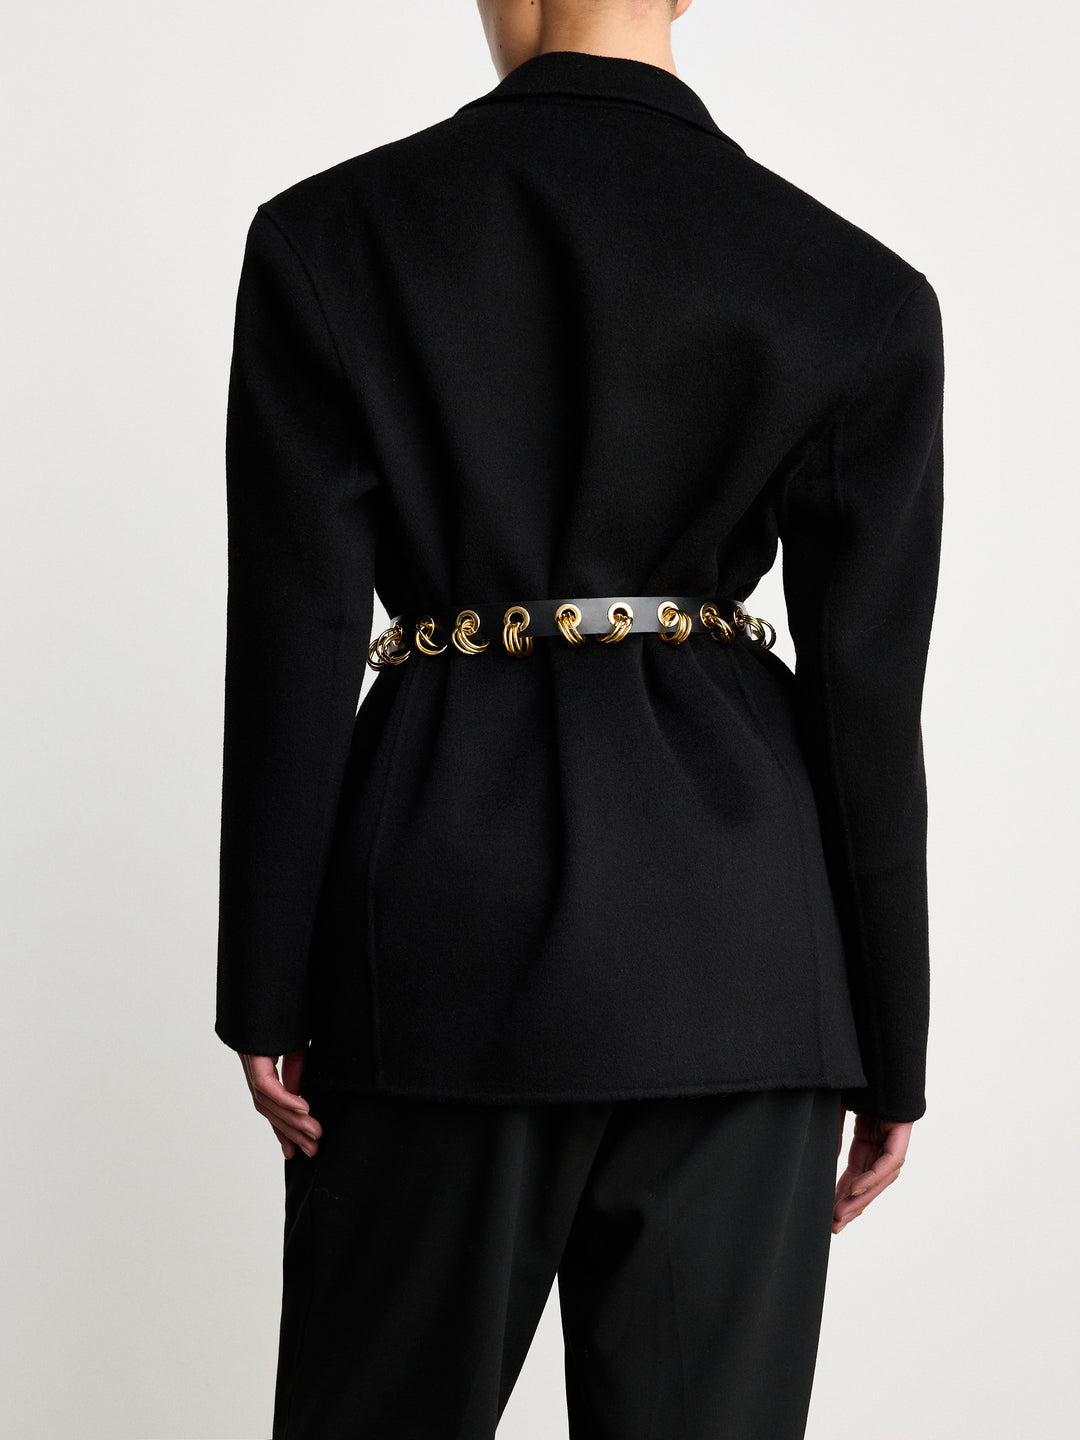 Model wearing Déhanche Revenge Gold black leather belt with gold grommets and buckle, styled with a black blazer and black trousers, back view.